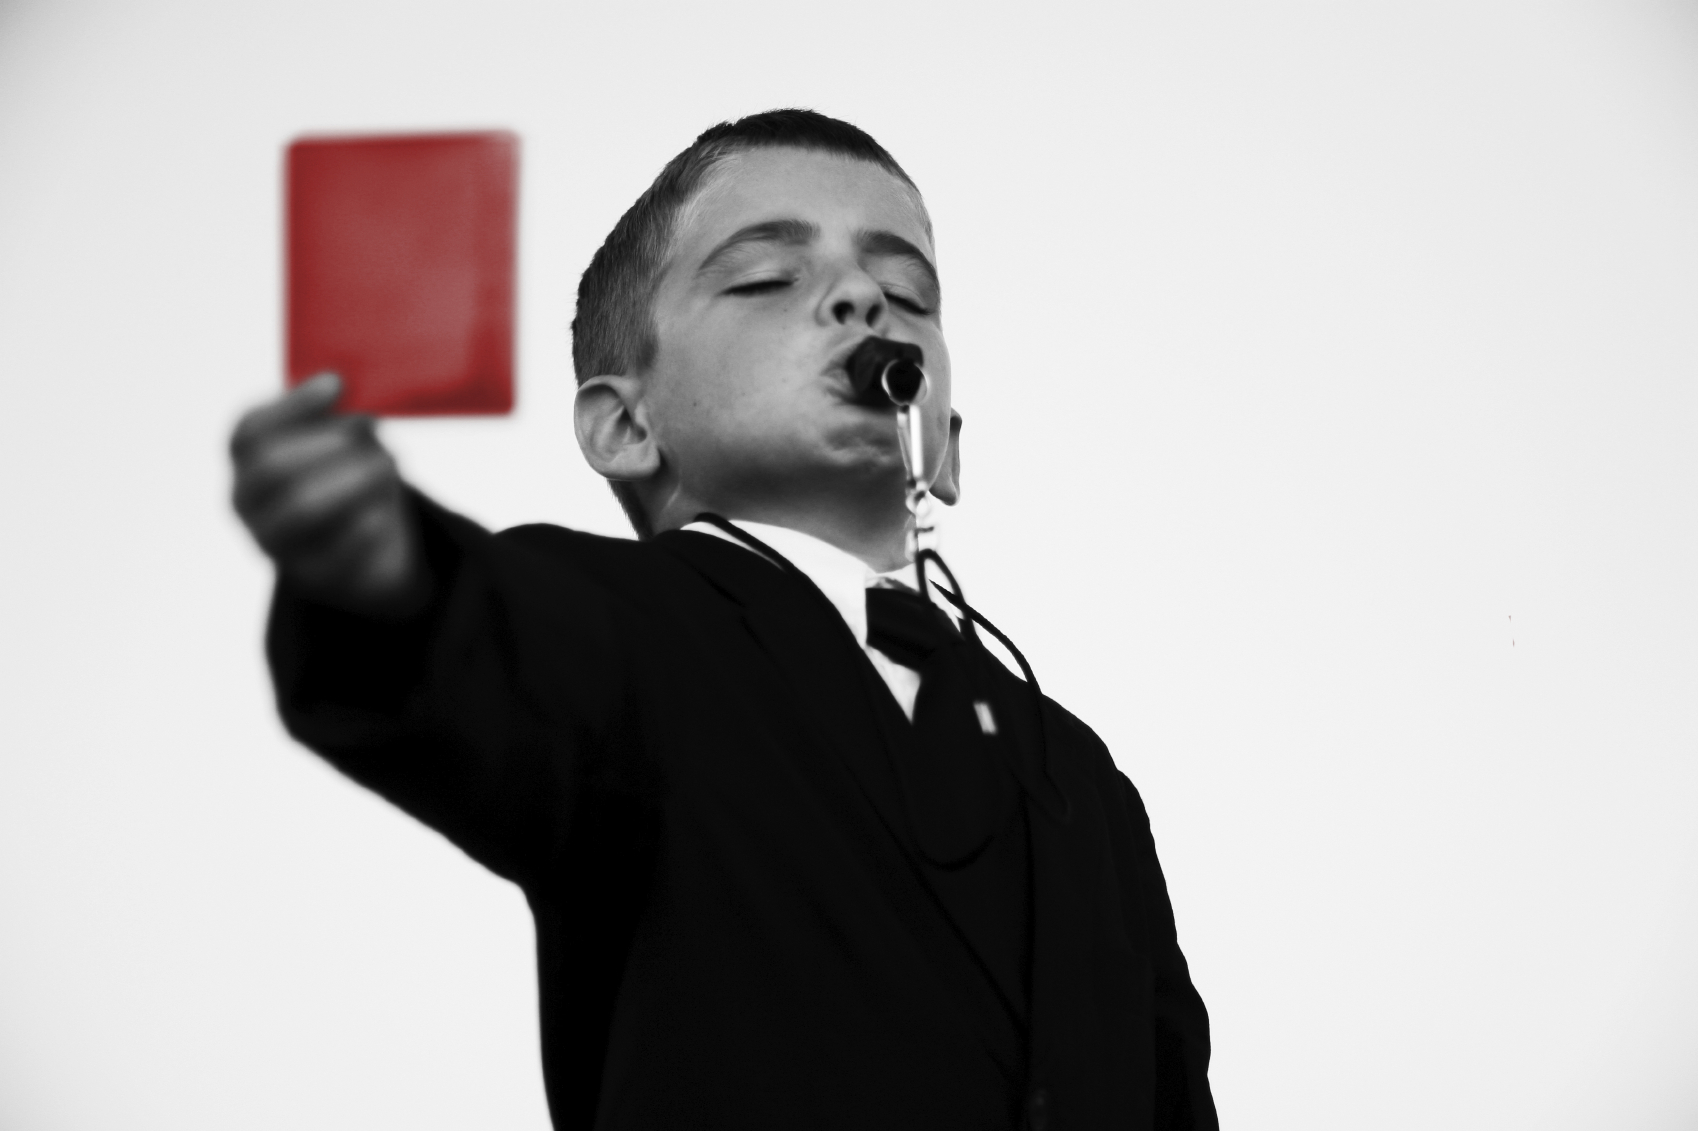 boy wearing a suit with a whistle showing a red card